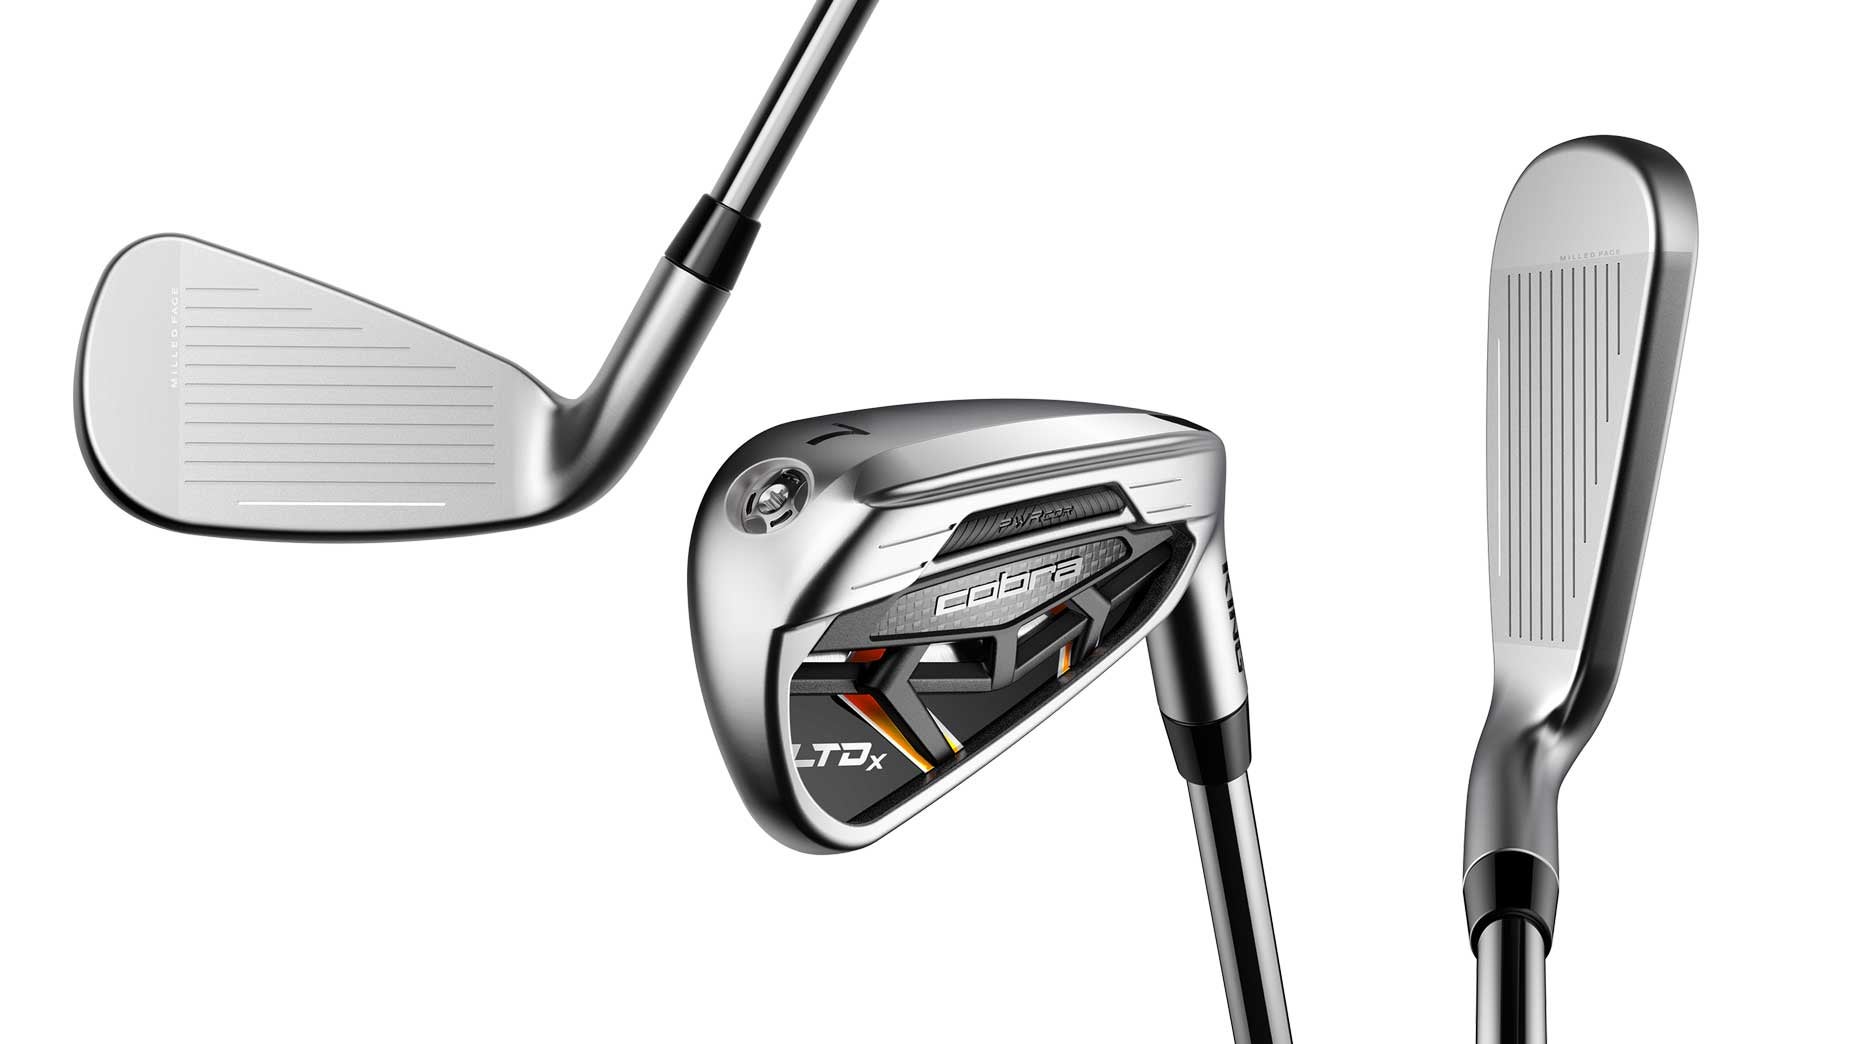 FIRST LOOK: Cobra's LTDx and LTDx One-length irons